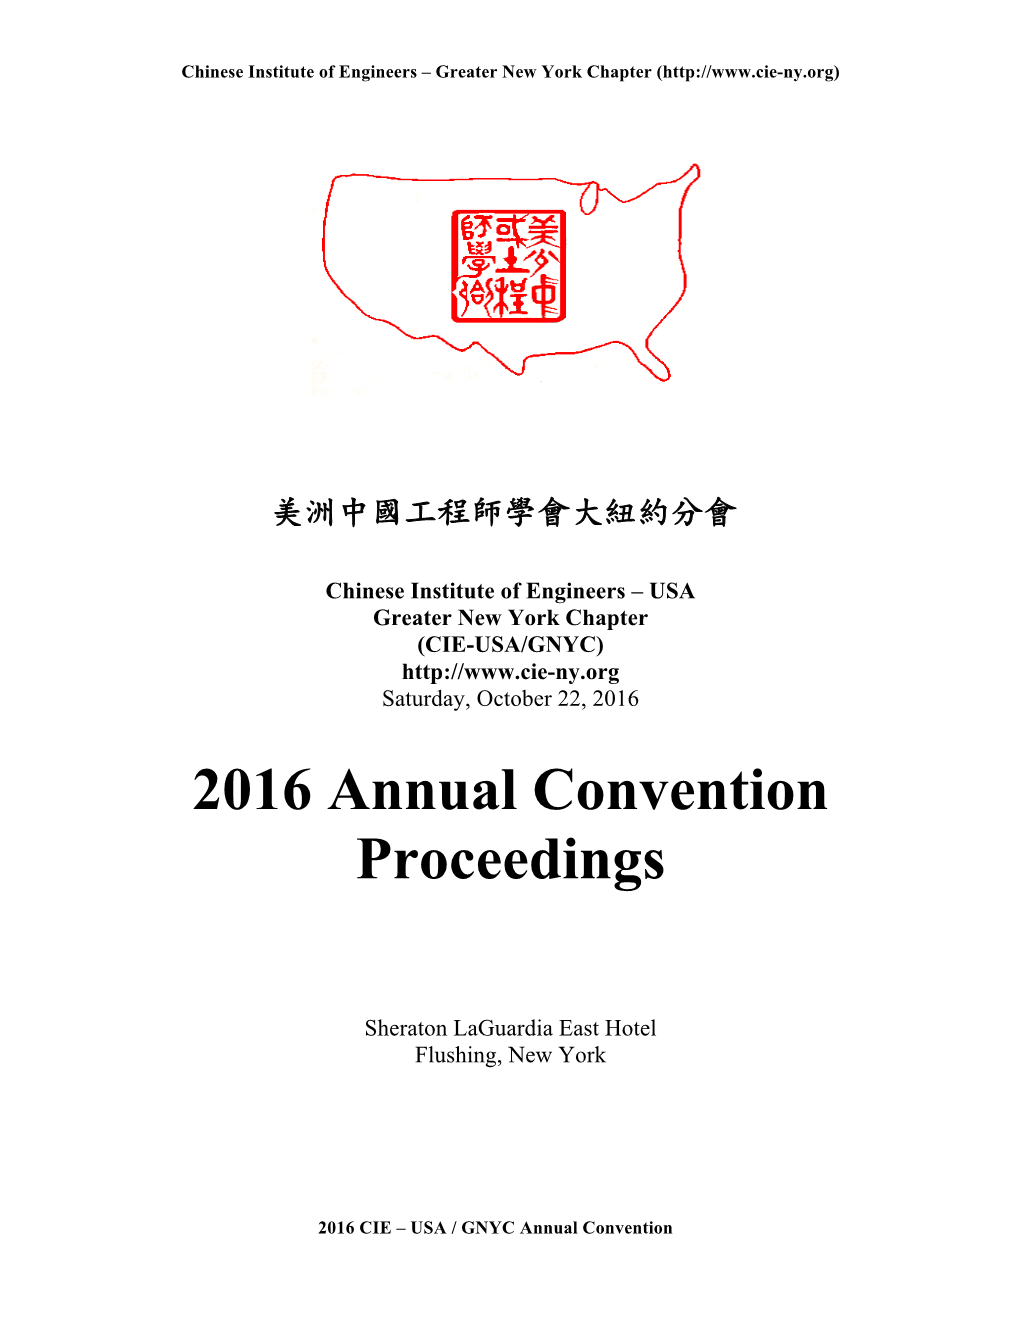 2016 Annual Convention Proceedings